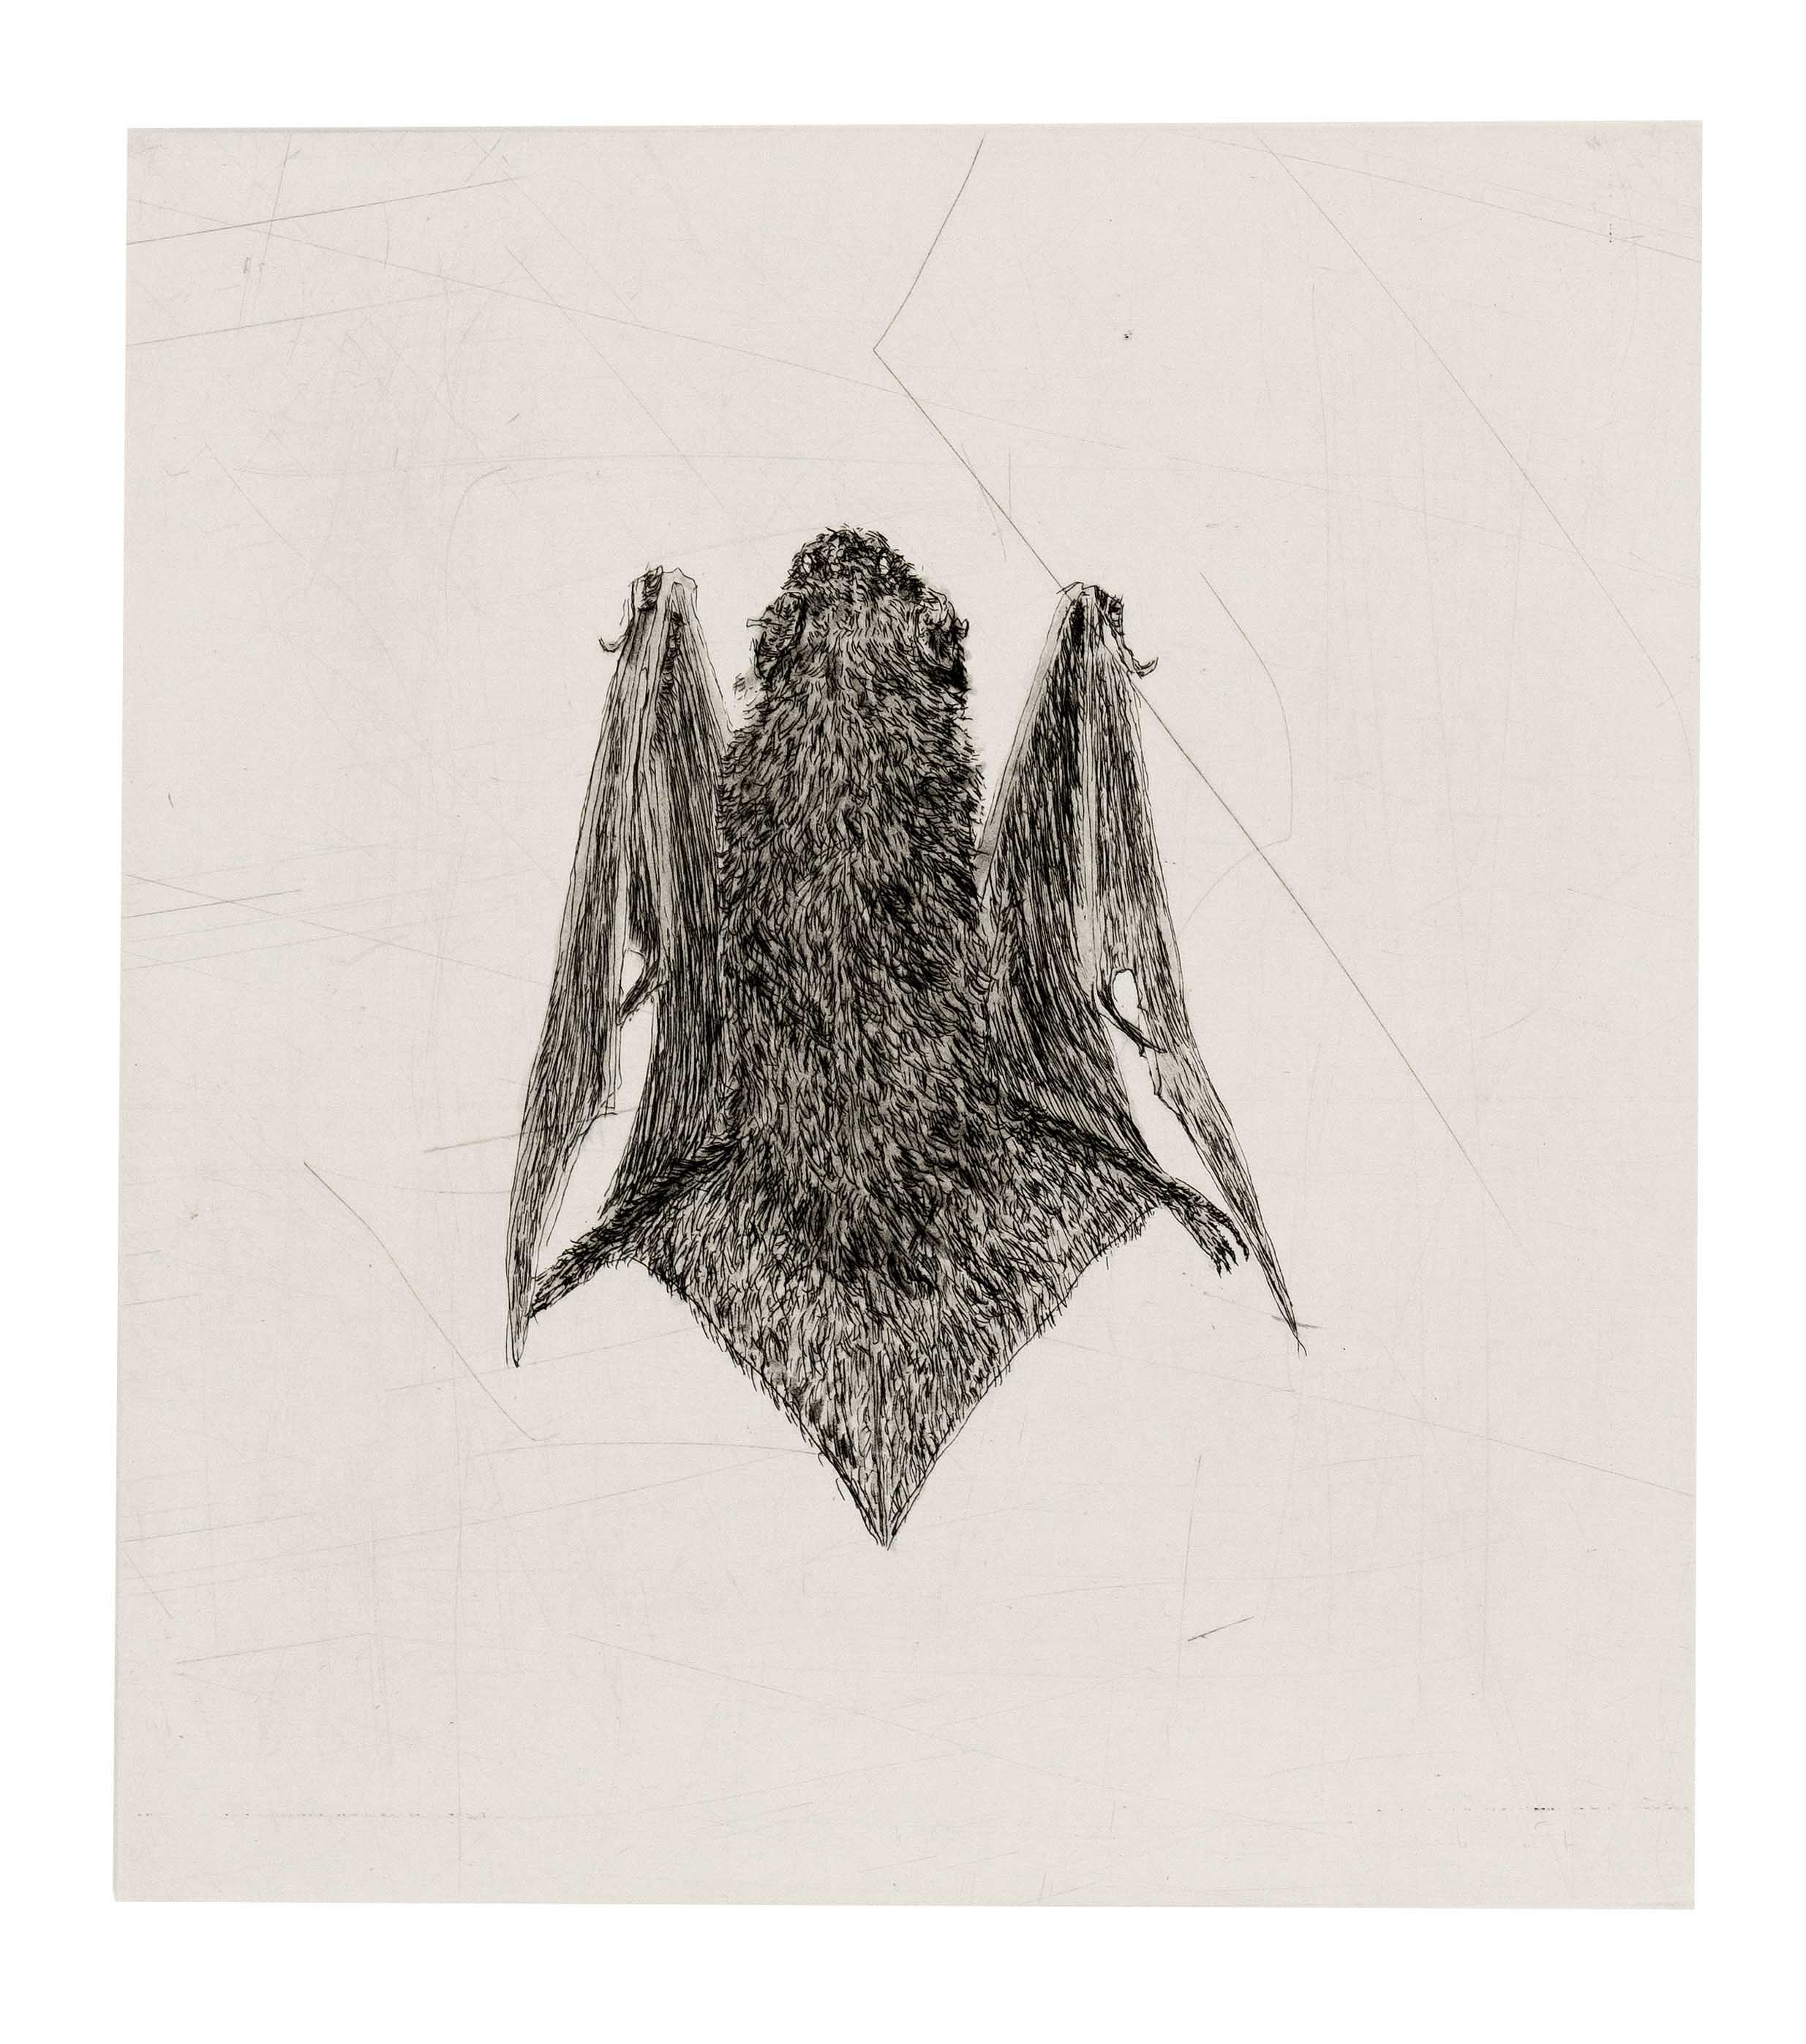 Smith, Kiki. 1954 Nuremberg - lives and works in New York. Bat. 2000. 2 etchings/velin, each